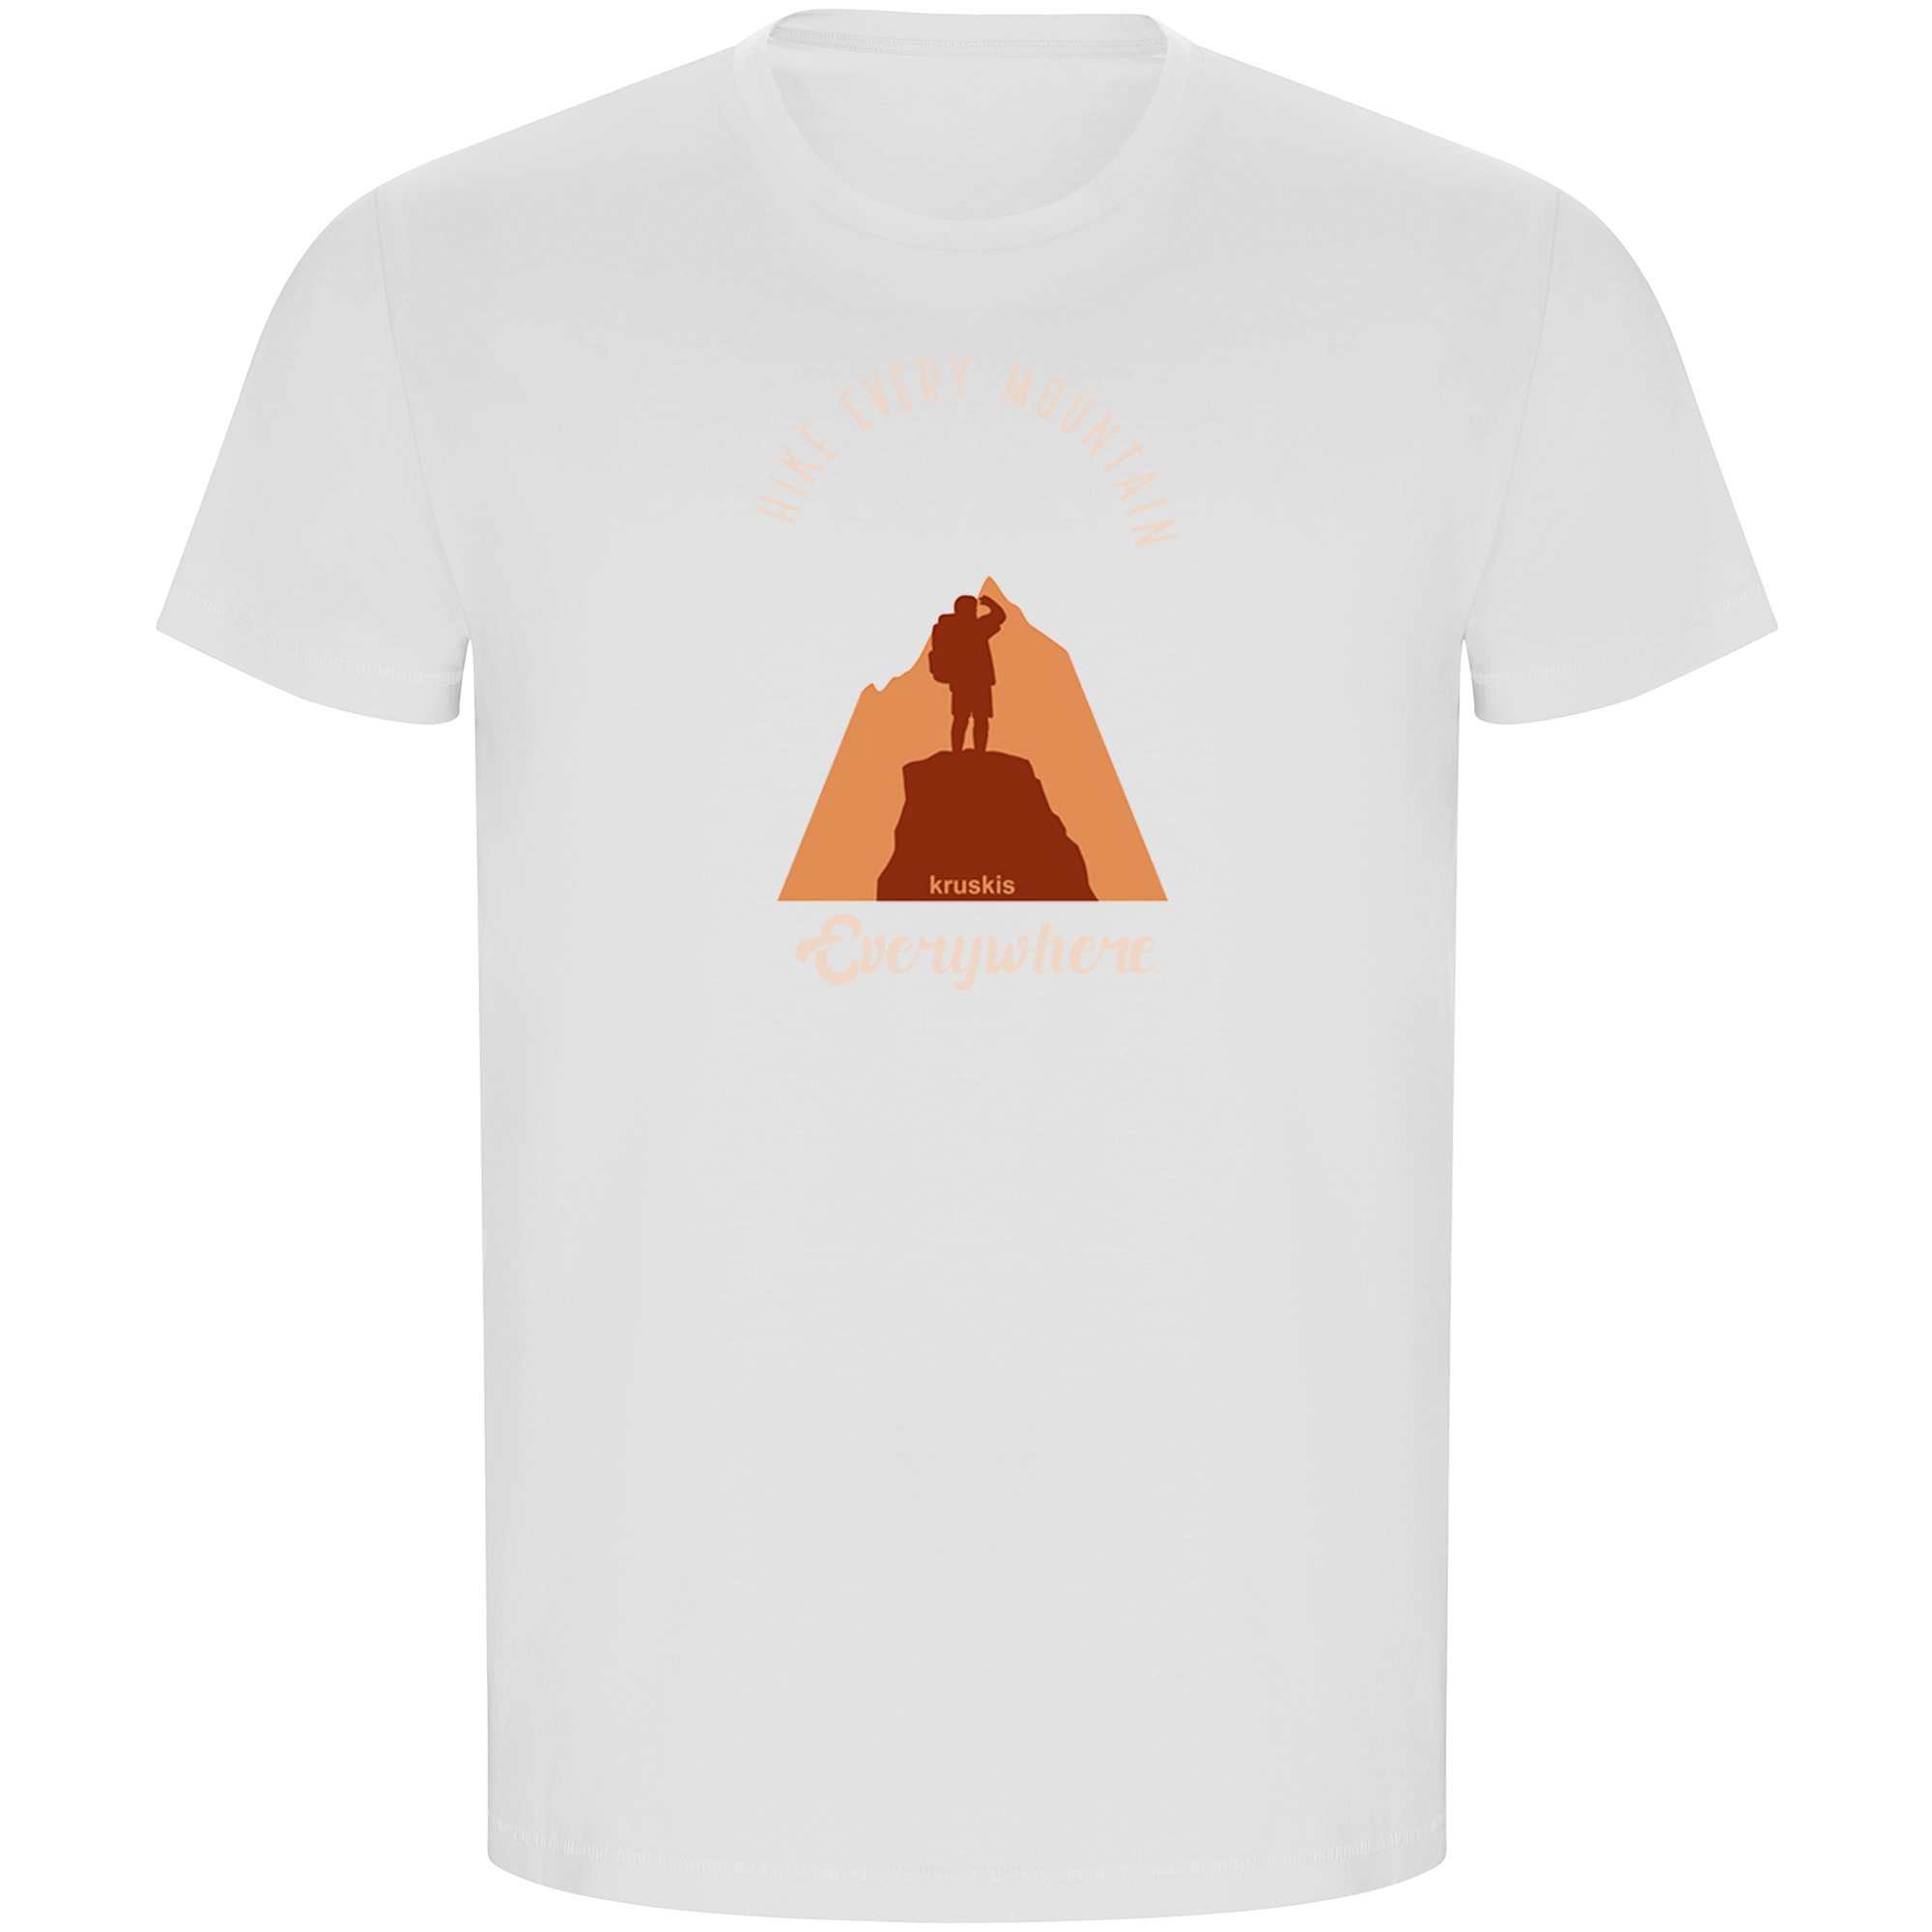 T Shirt ECO Mountaineering Hike Every Mountain Short Sleeves Man